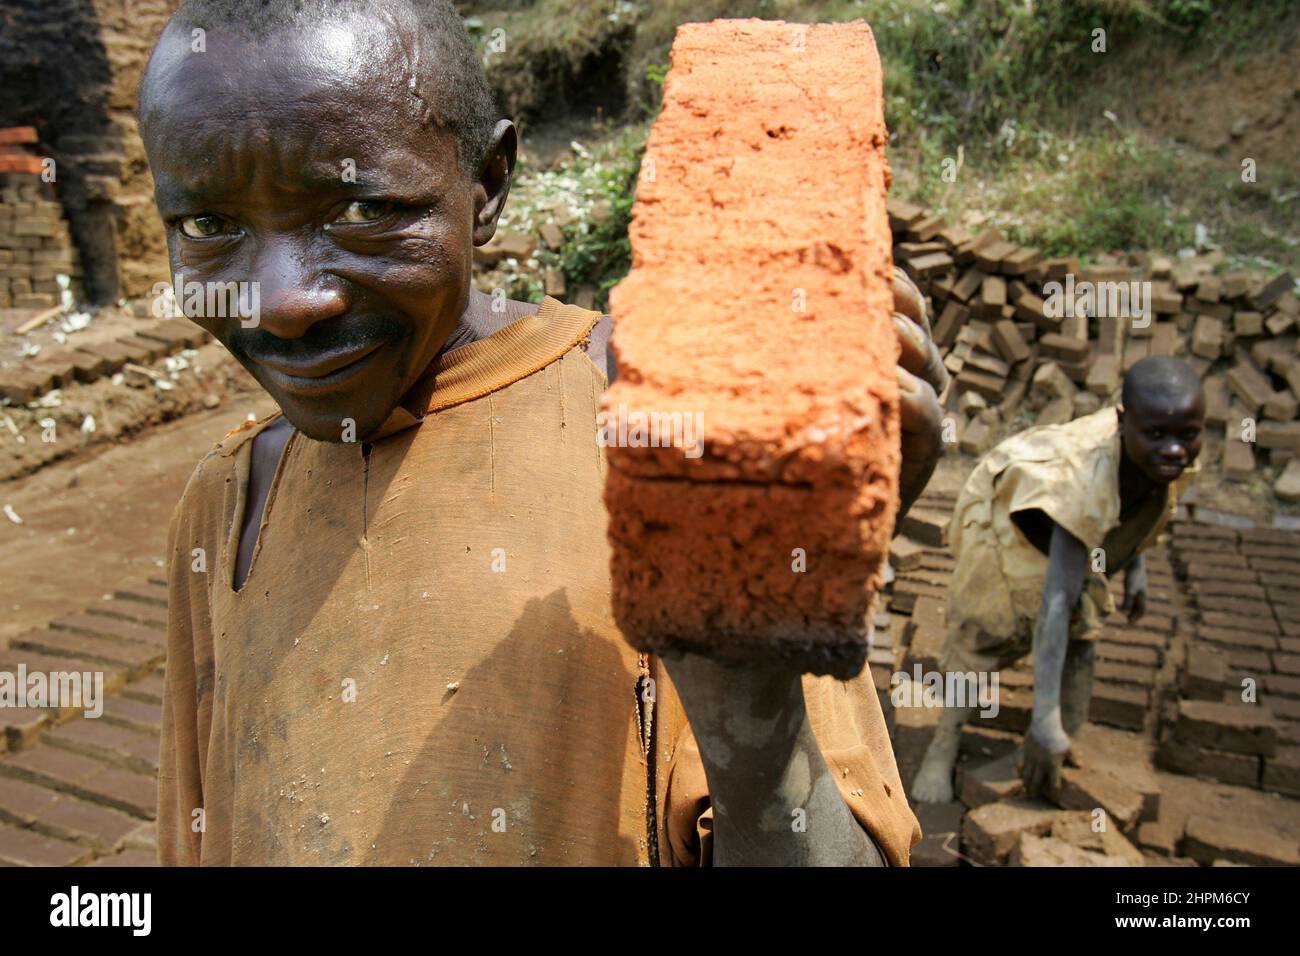 Brick manufacturing at Lake Kivu near Bukavu.  The picture is deceptive, however, as war has been waged in eastern Congo since 1996. Mai Mai warriors and Interahamwer mass murderers from Rwanda have killed over 4 million people. Stock Photo